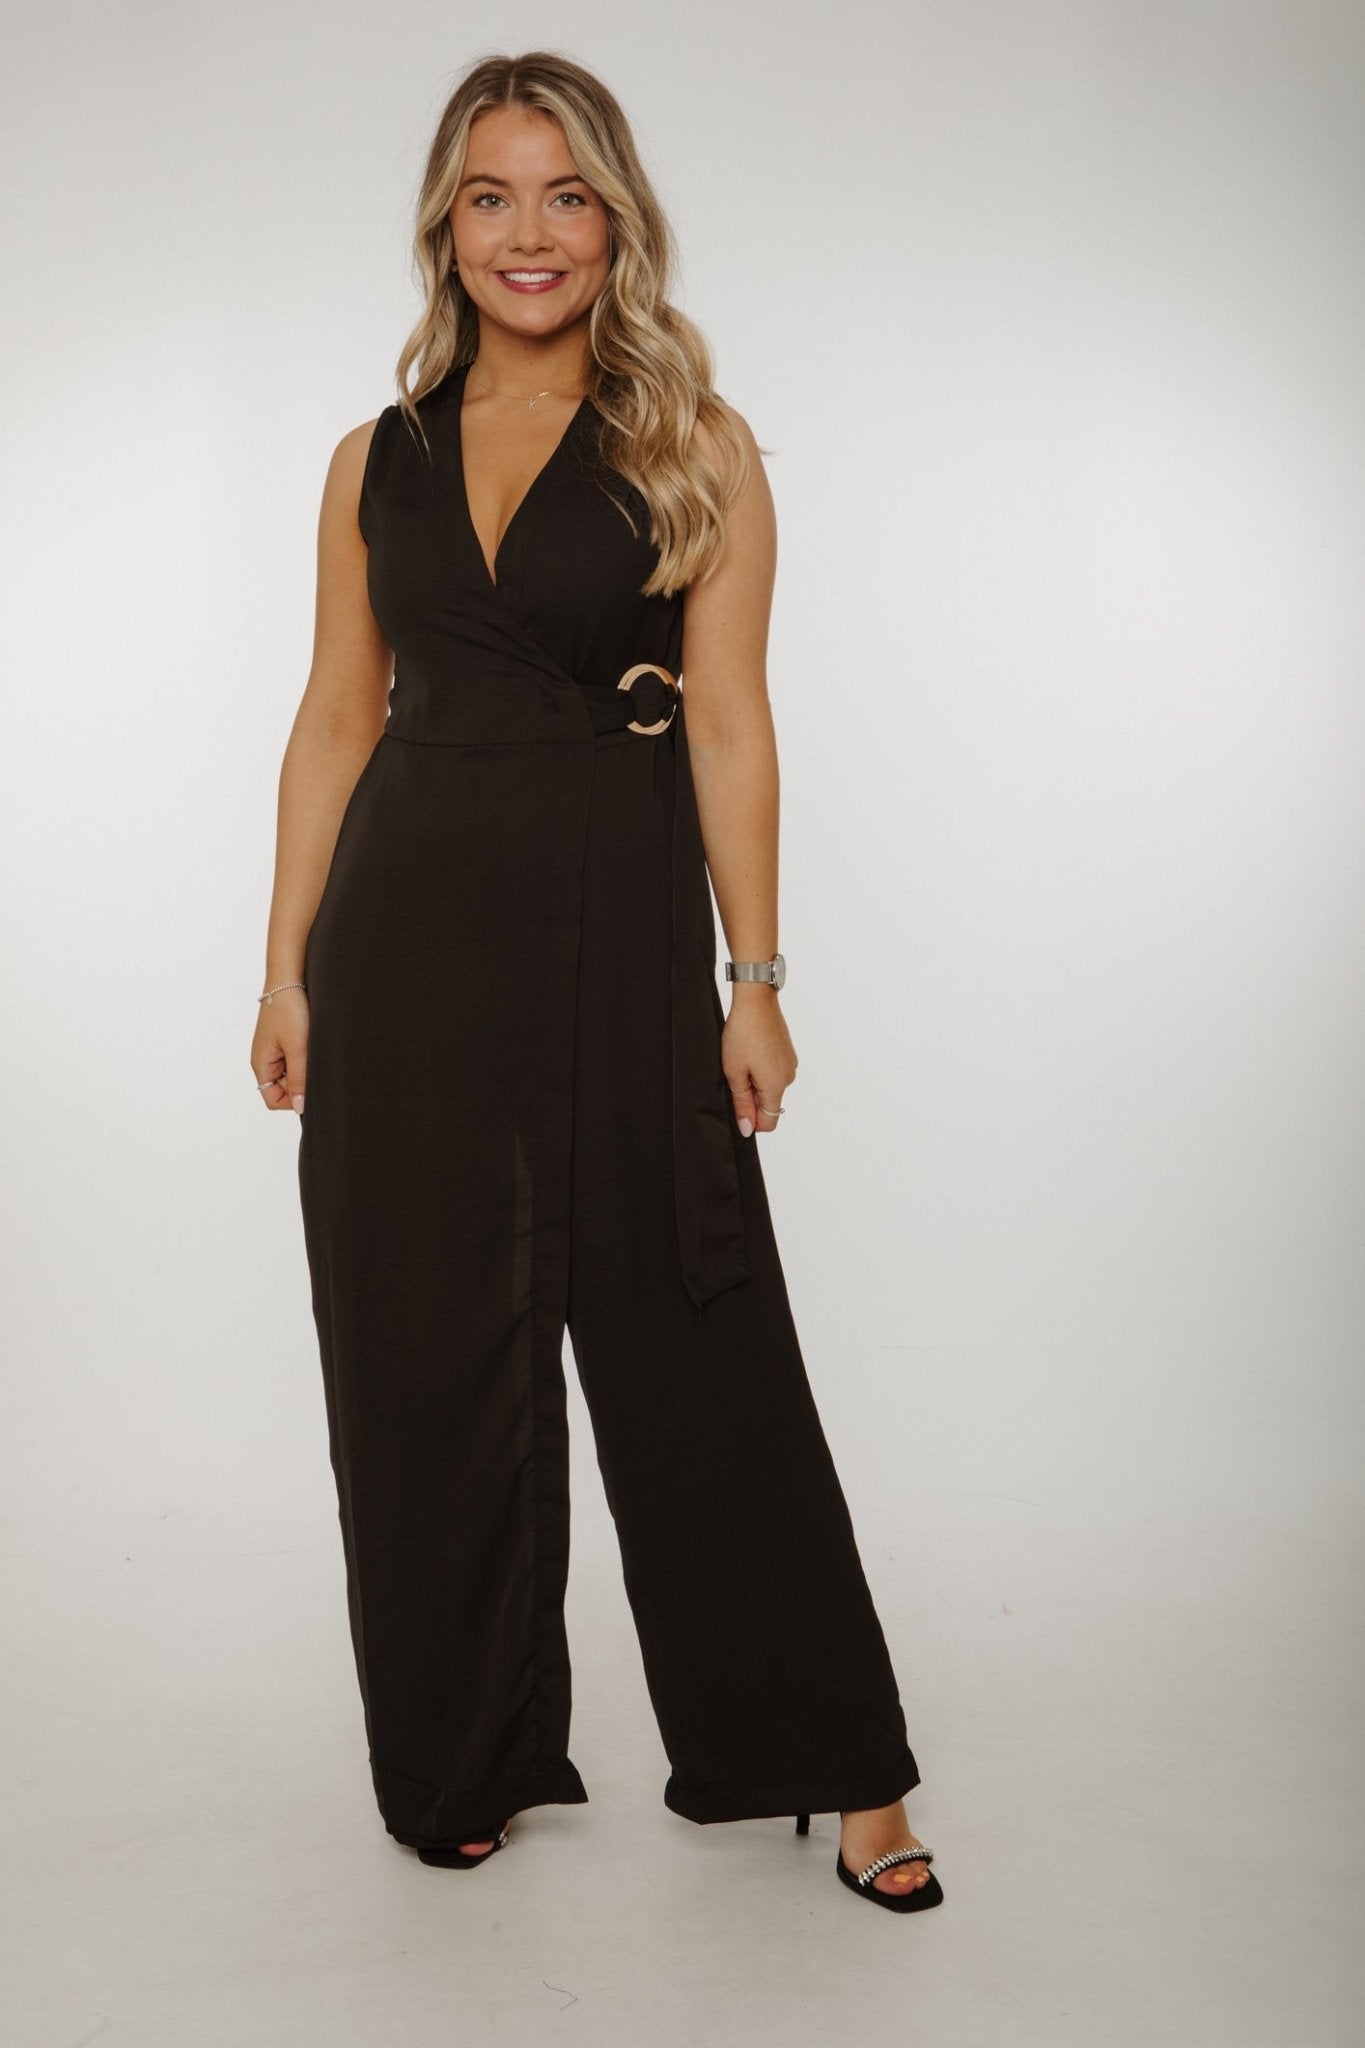 Holly Belted Sleeveless Jumpsuit In Black - The Walk in Wardrobe